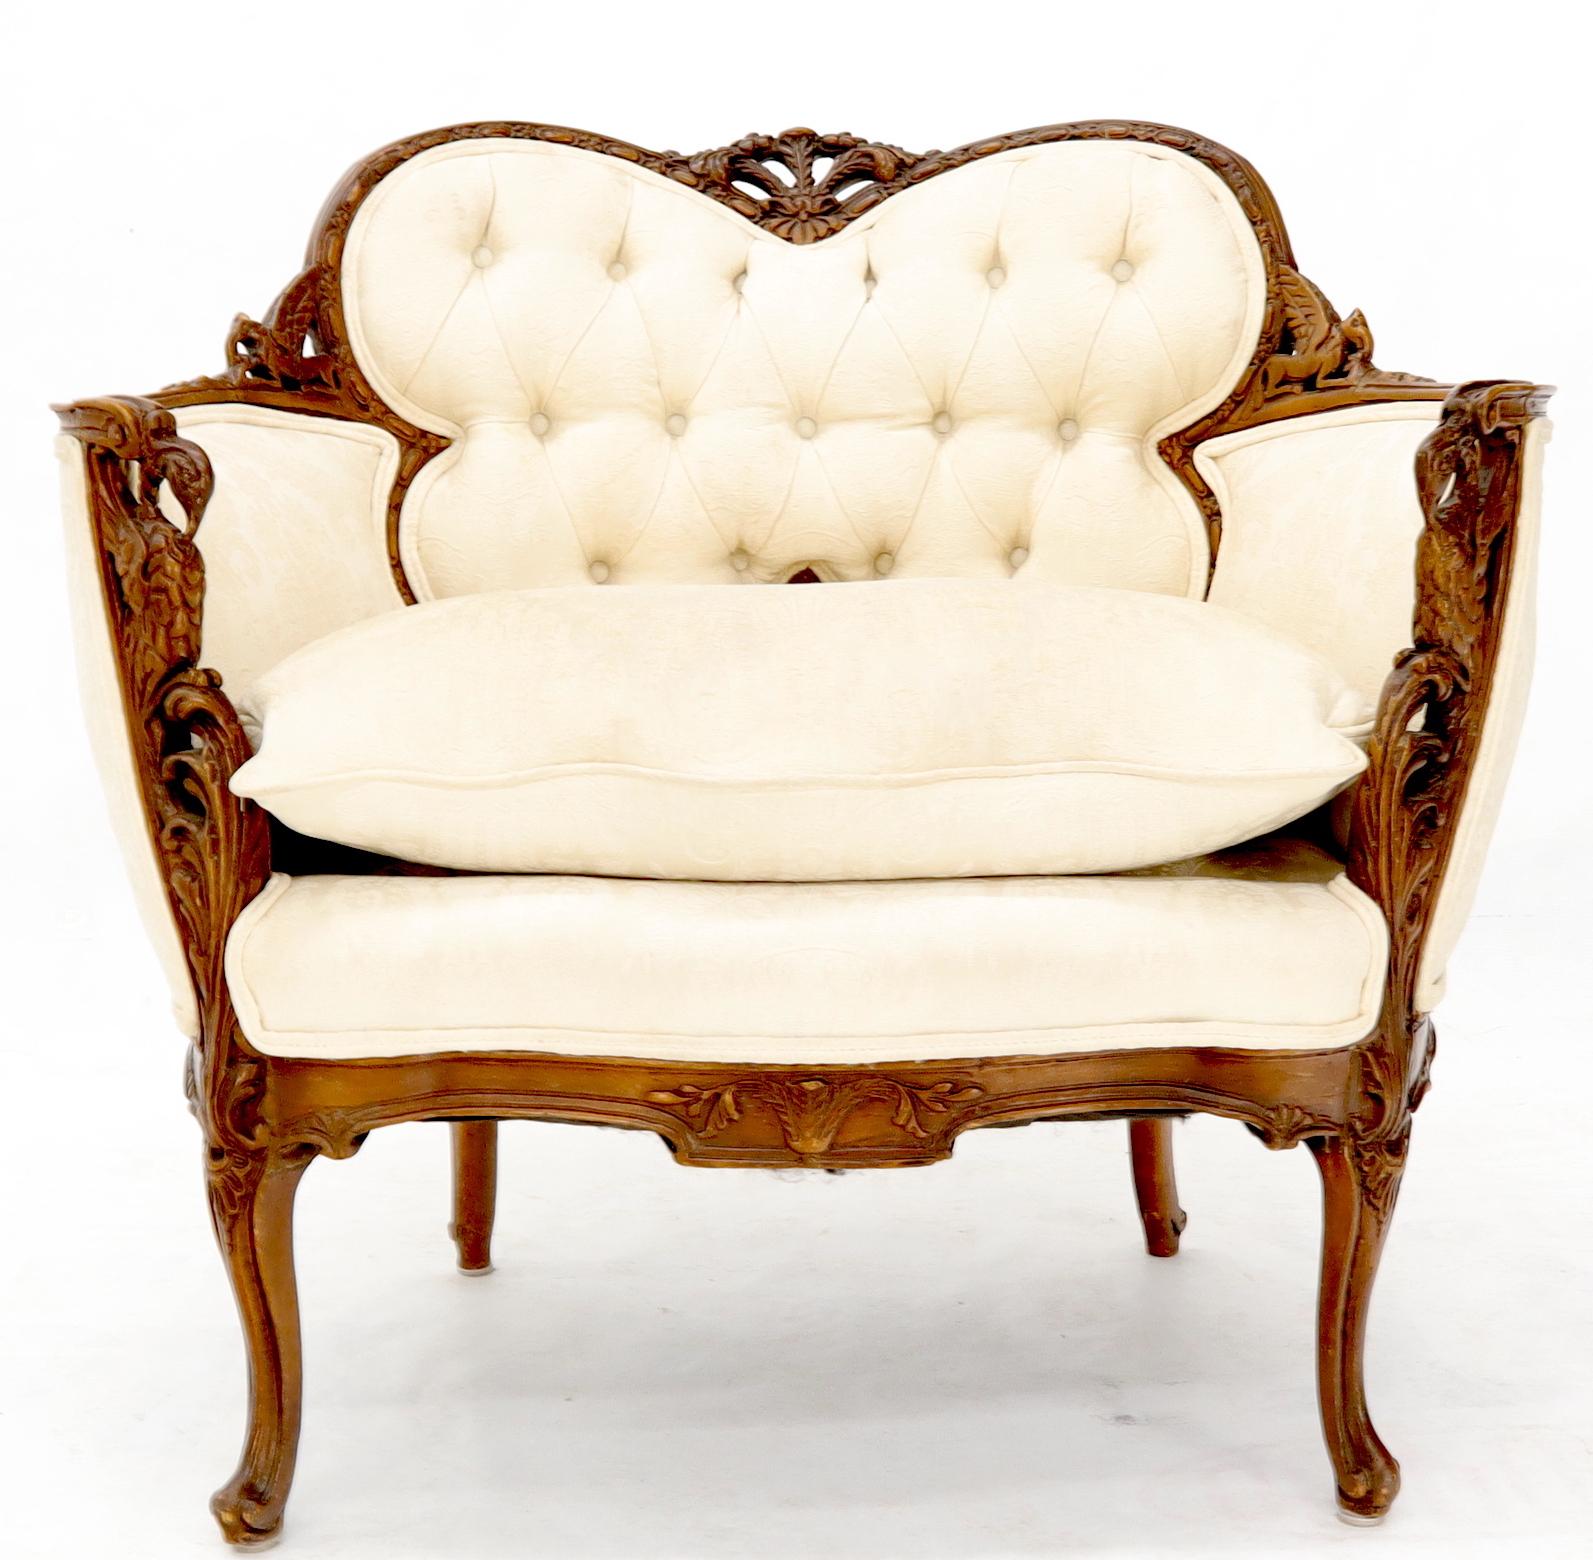 Heavily Carved Walnut Wide Seat Lounge Chair In Good Condition For Sale In Rockaway, NJ